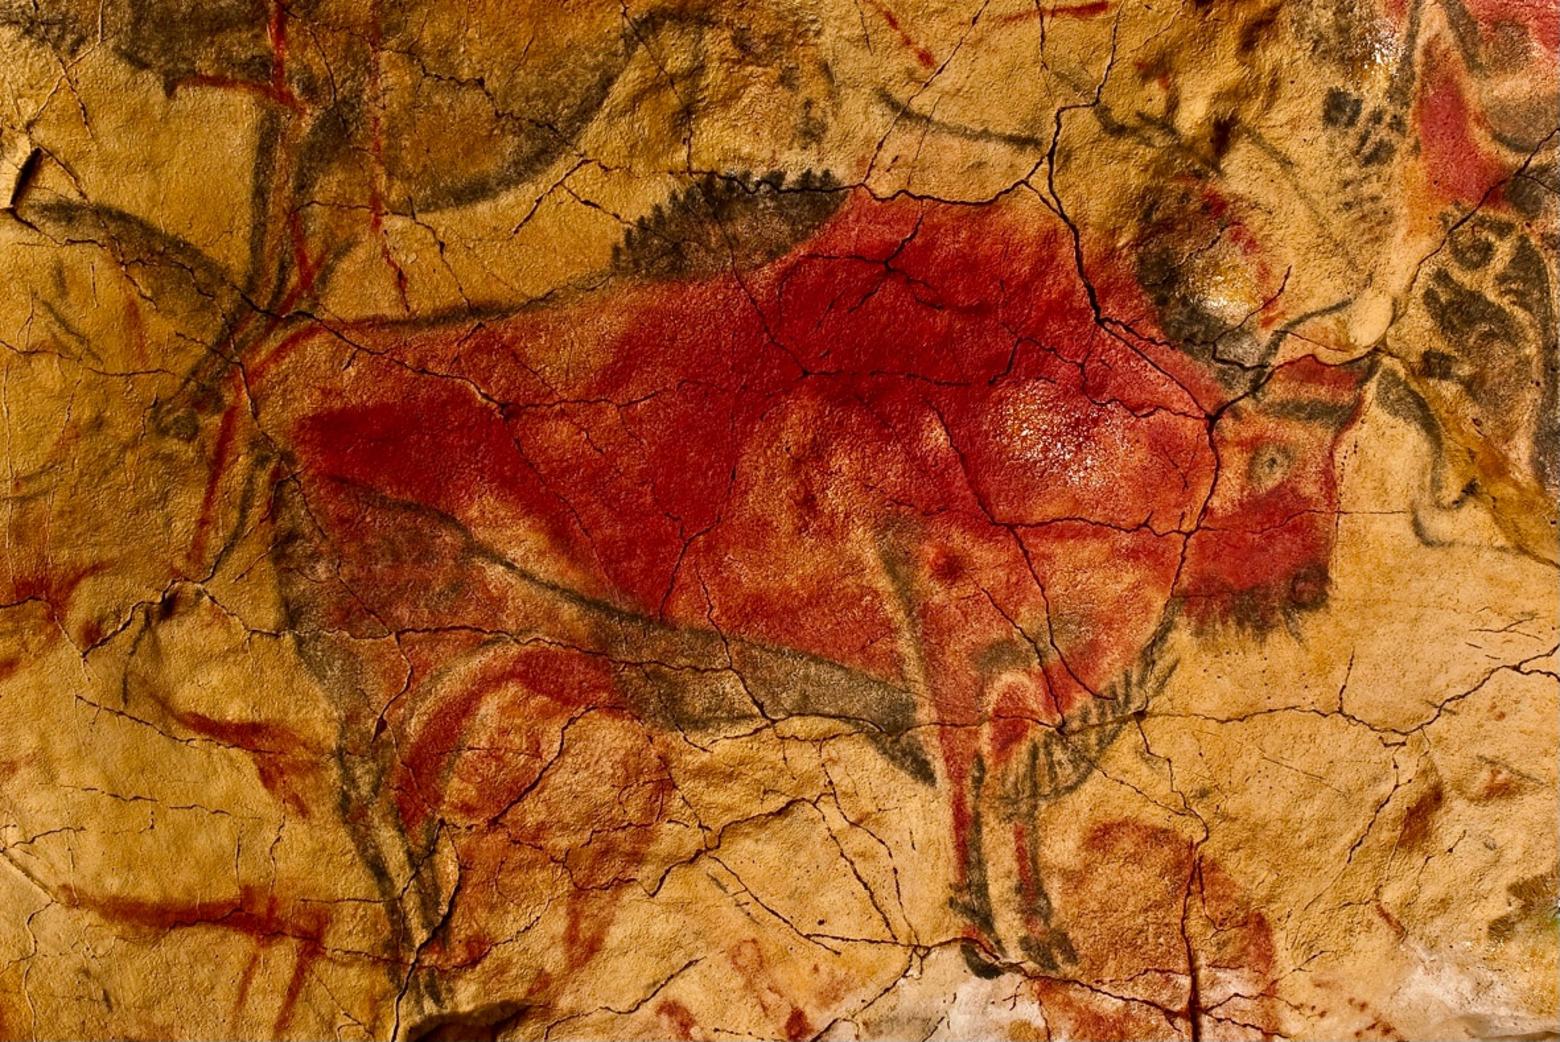 Paleolithic painting of bison (European wisent) at Altamira Cave in northern Spain.